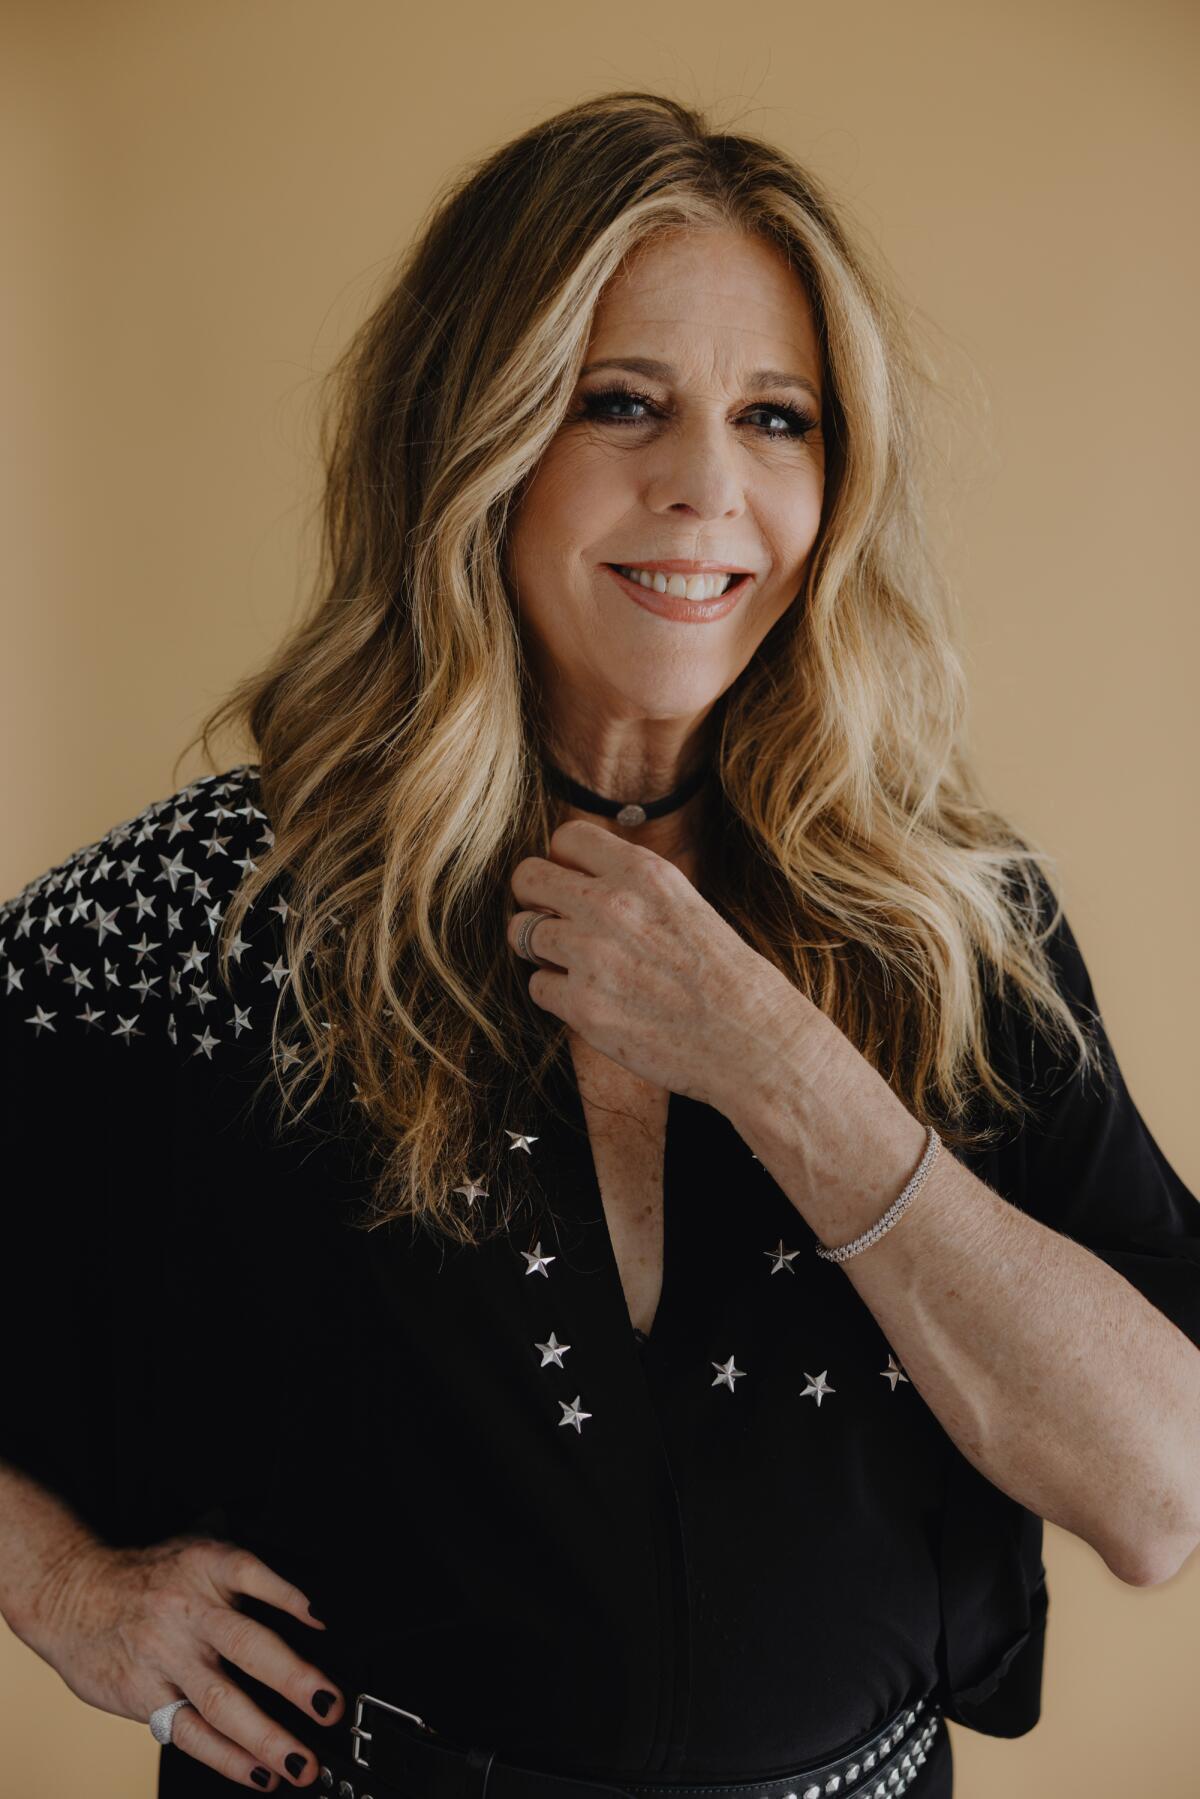 Rita Wilson wears a black top with stars for a portrait.